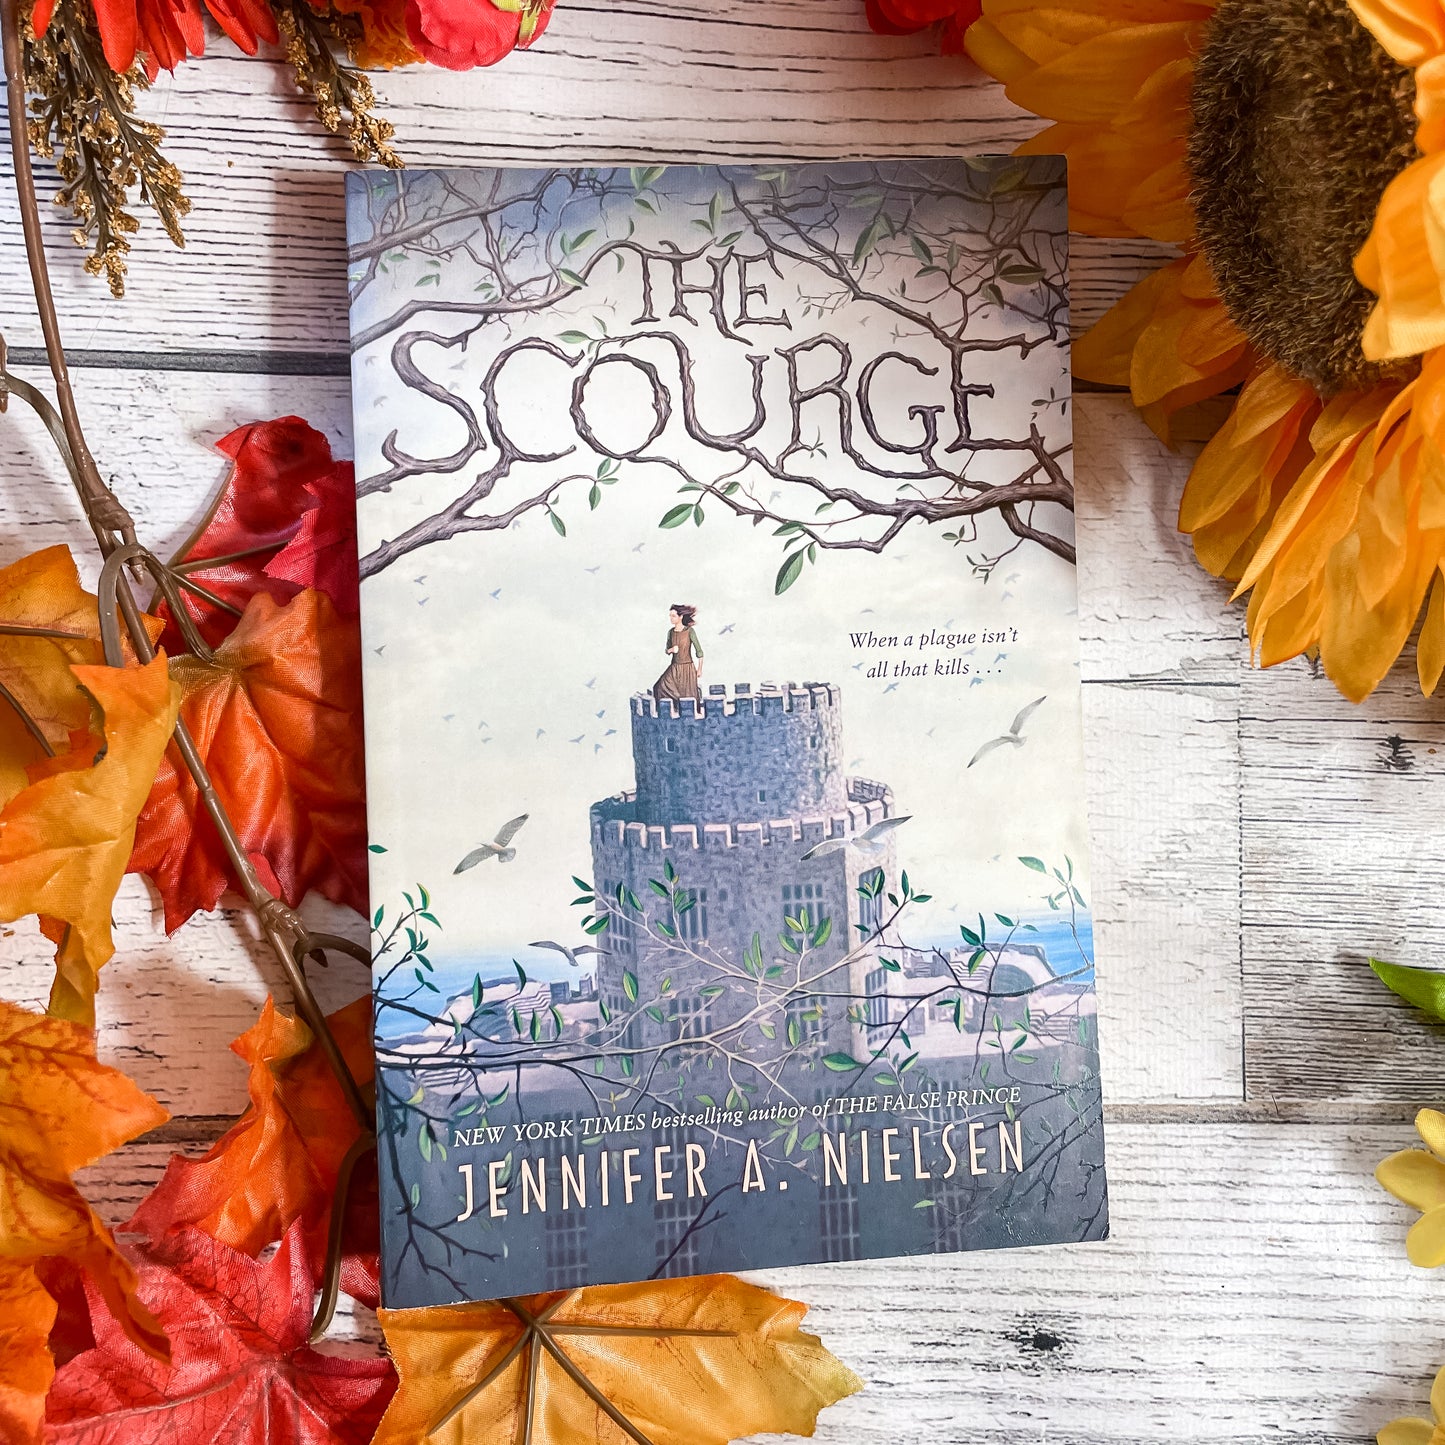 The Scourge by Jennifer A. Nielsen